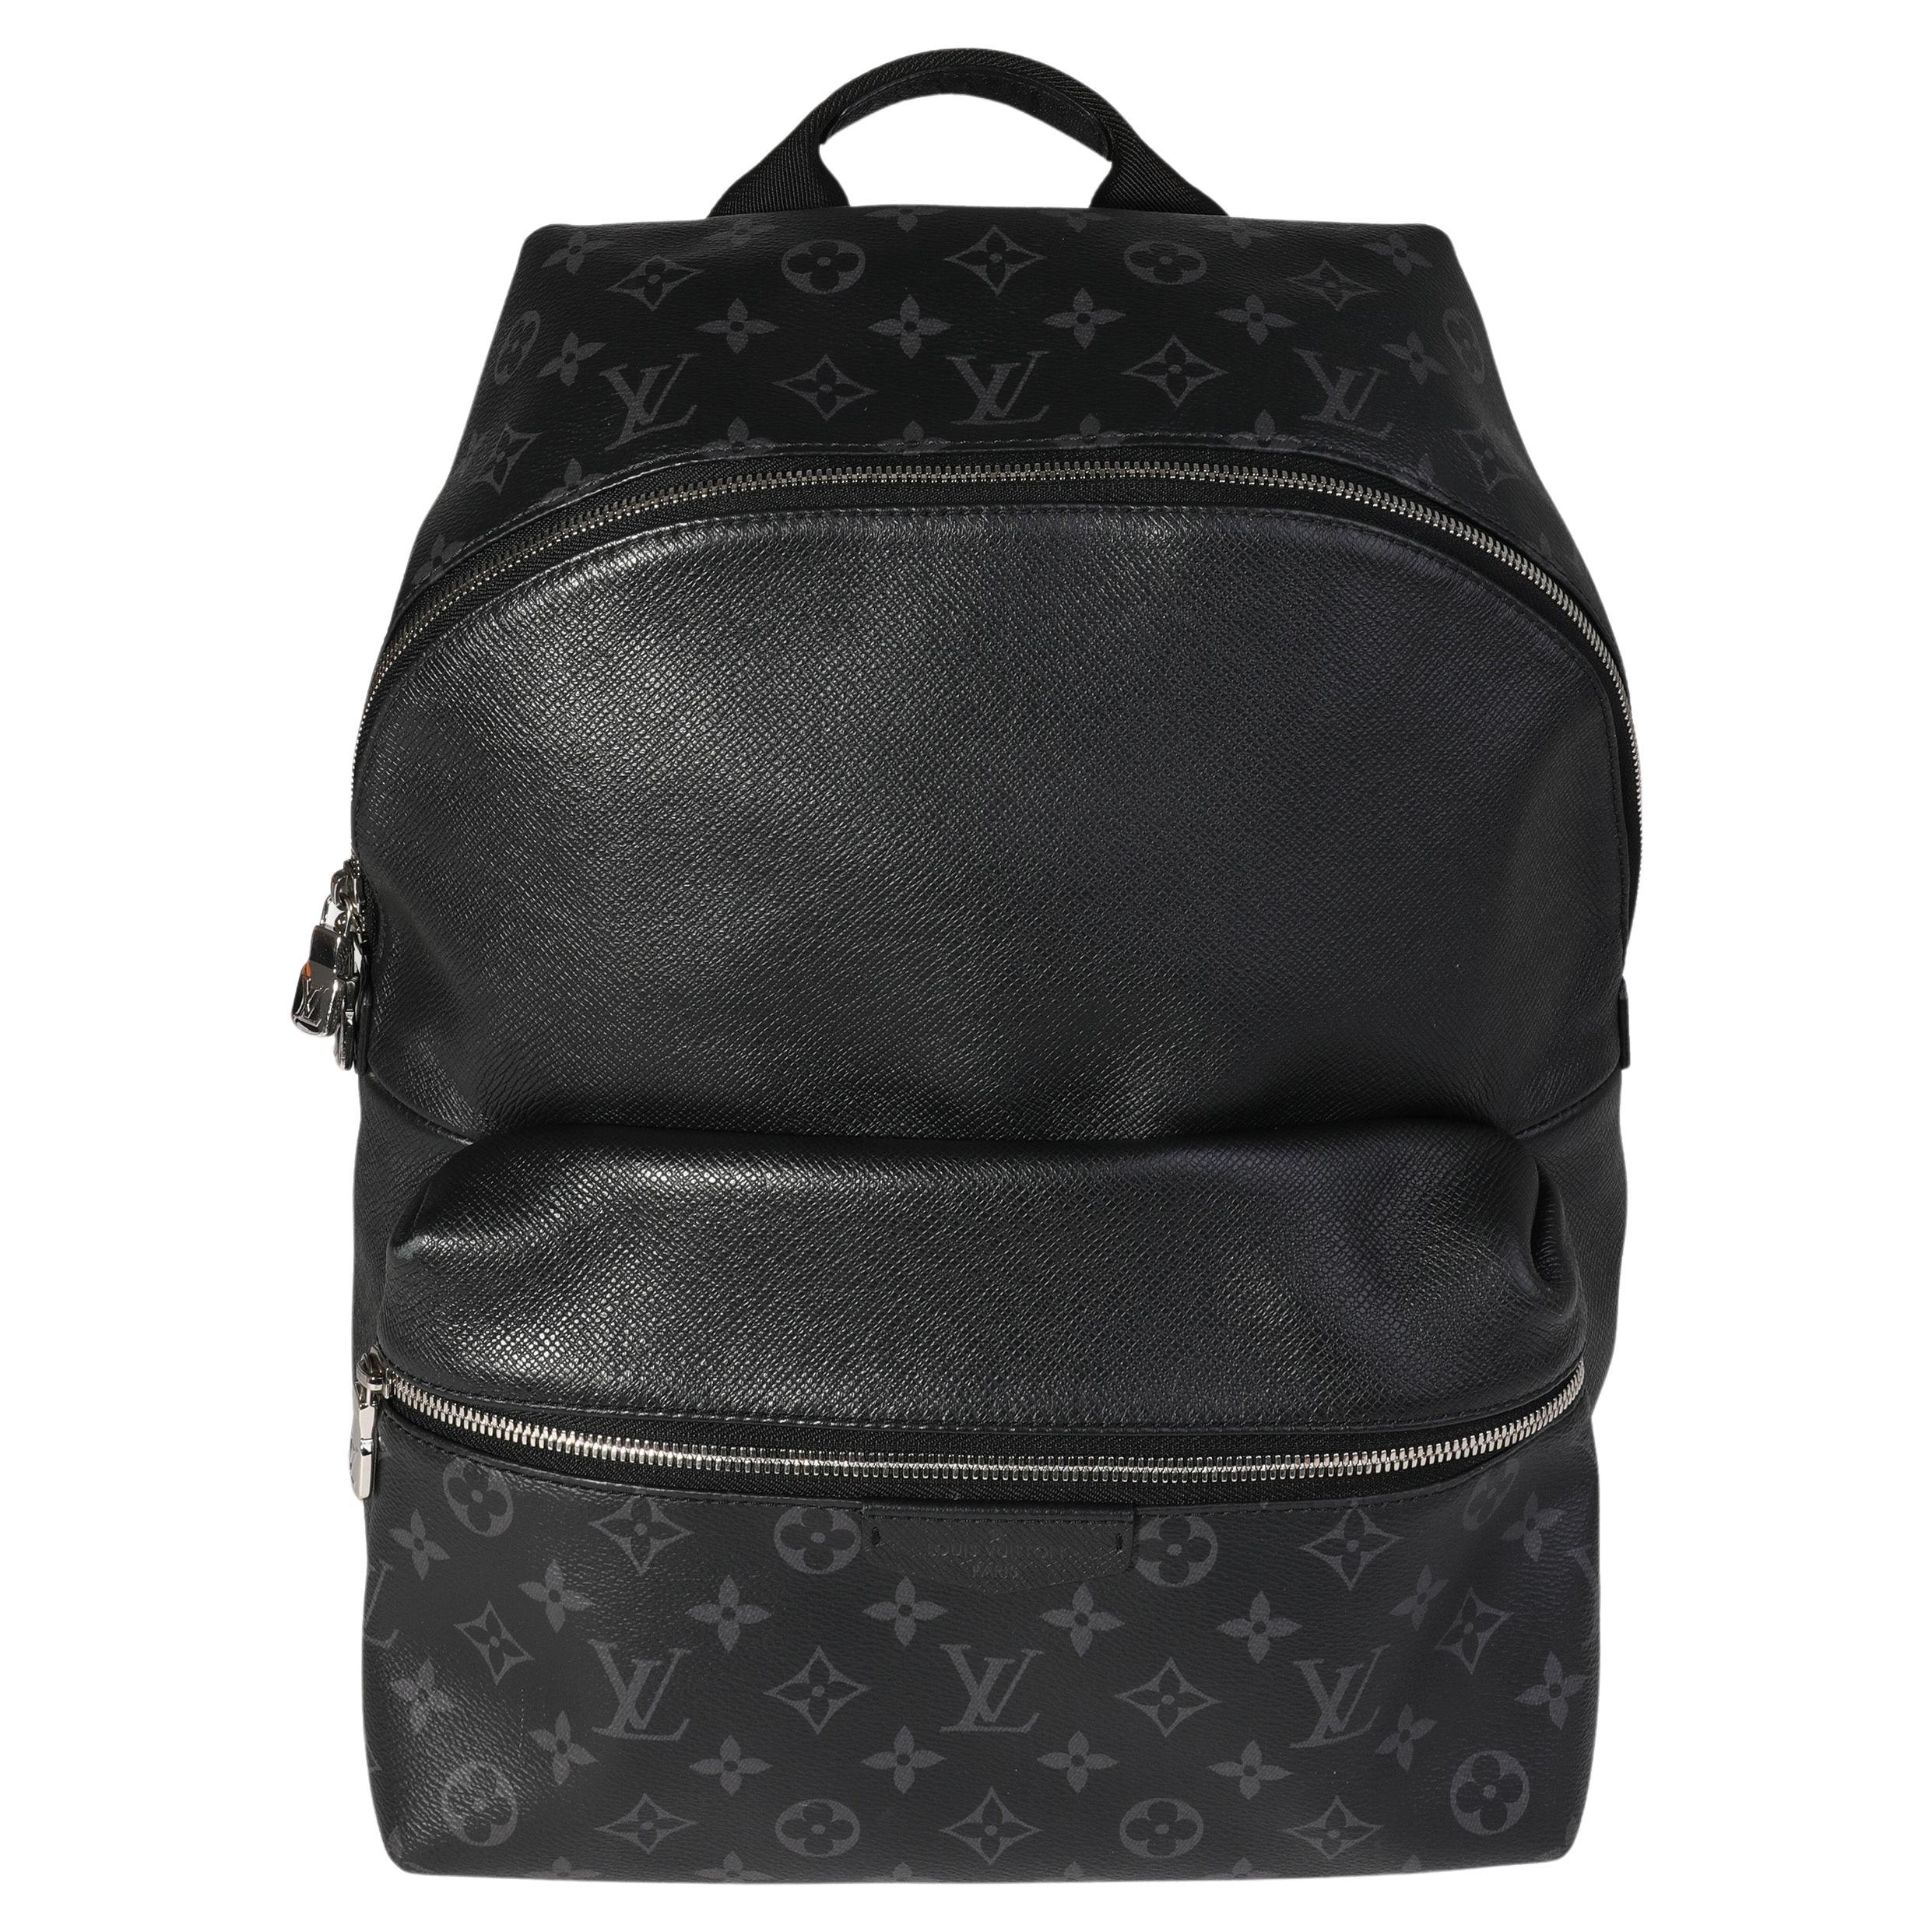 Louis Vuitton White Leather Monogram Discovery Backpack